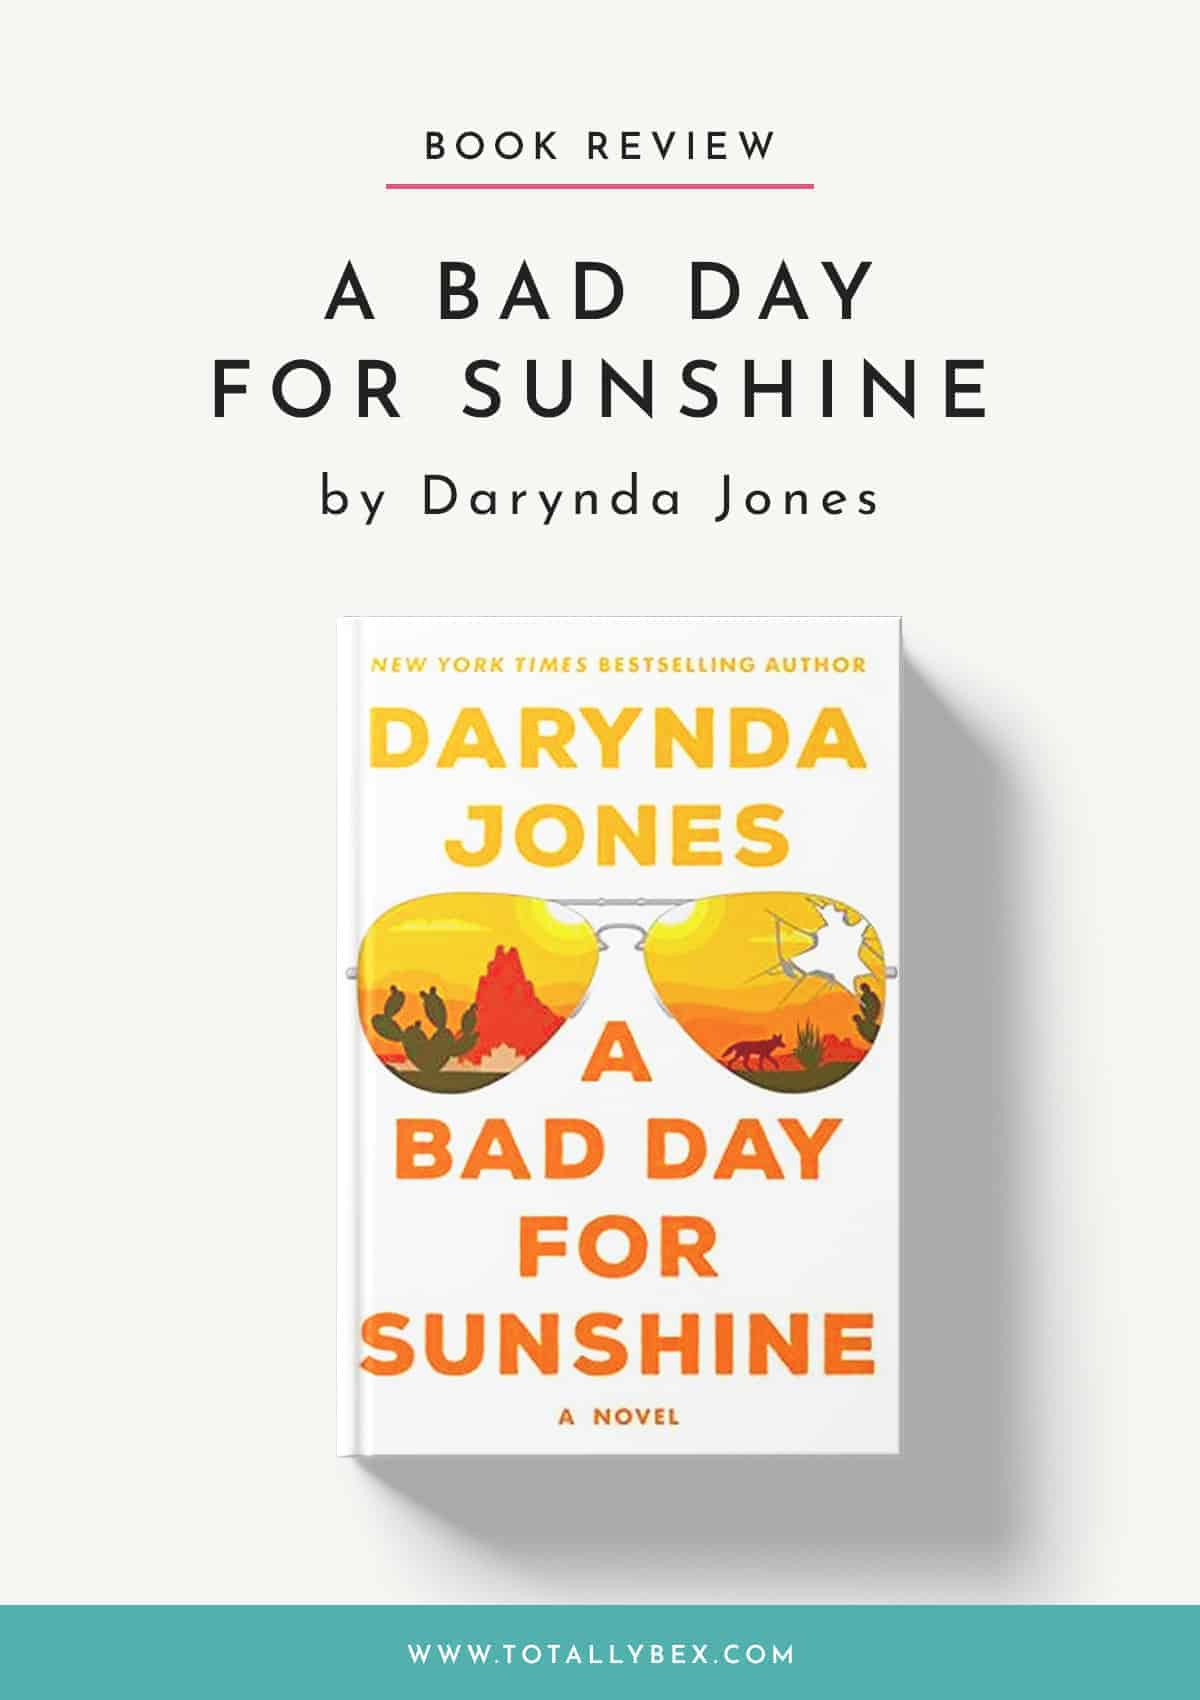 A Bad Day for Sunshine by Darynda Jones – My Review